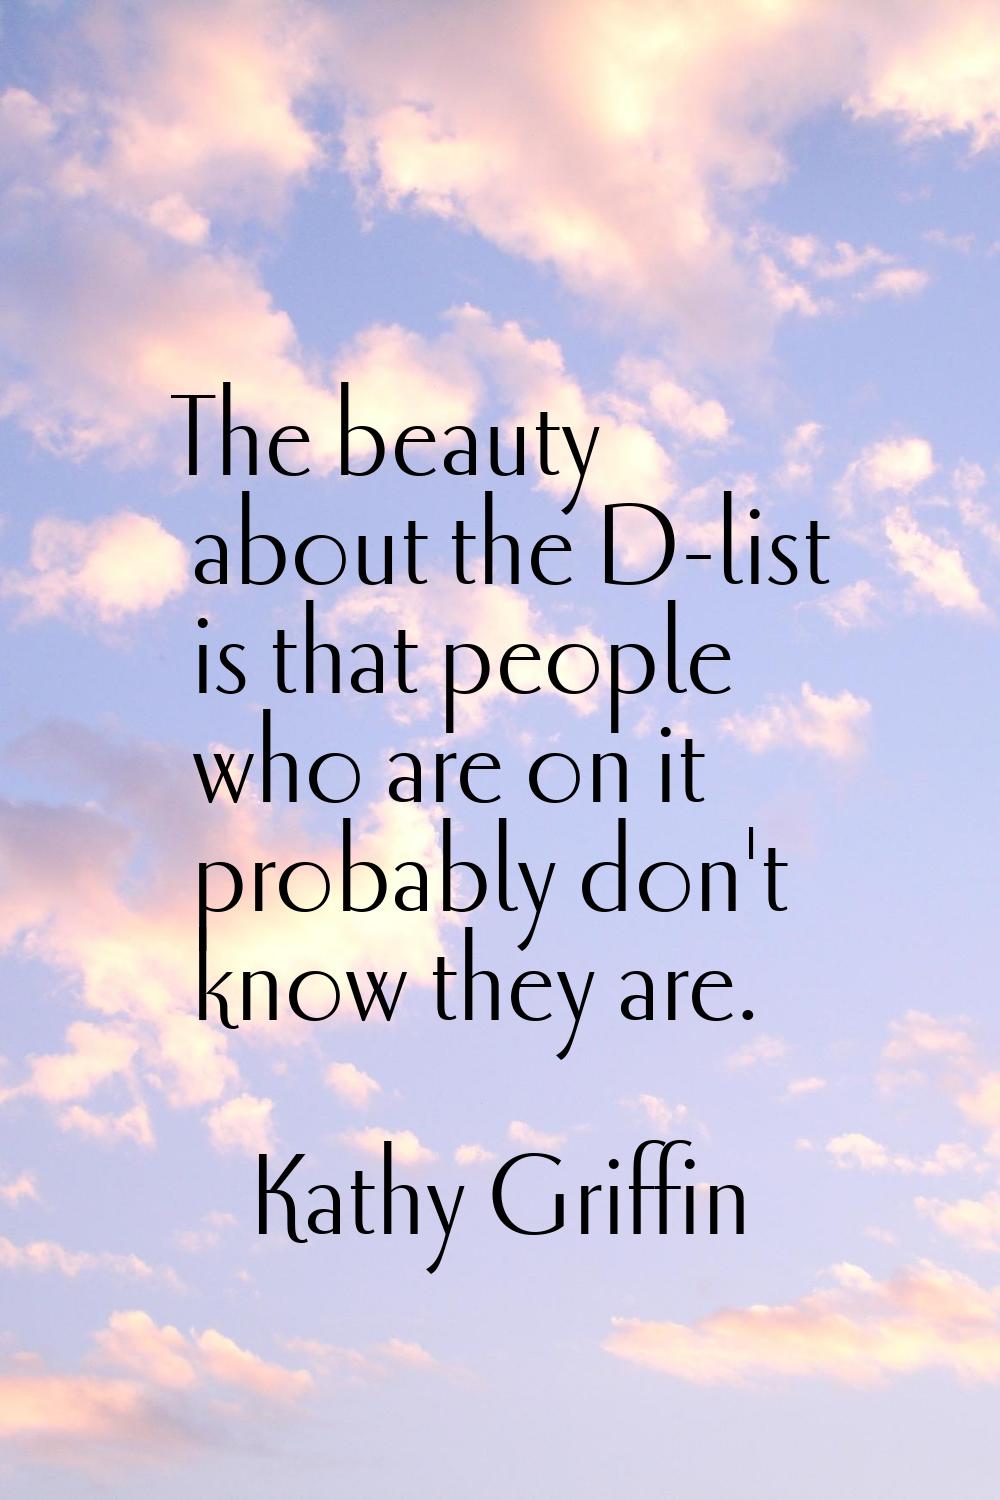 The beauty about the D-list is that people who are on it probably don't know they are.